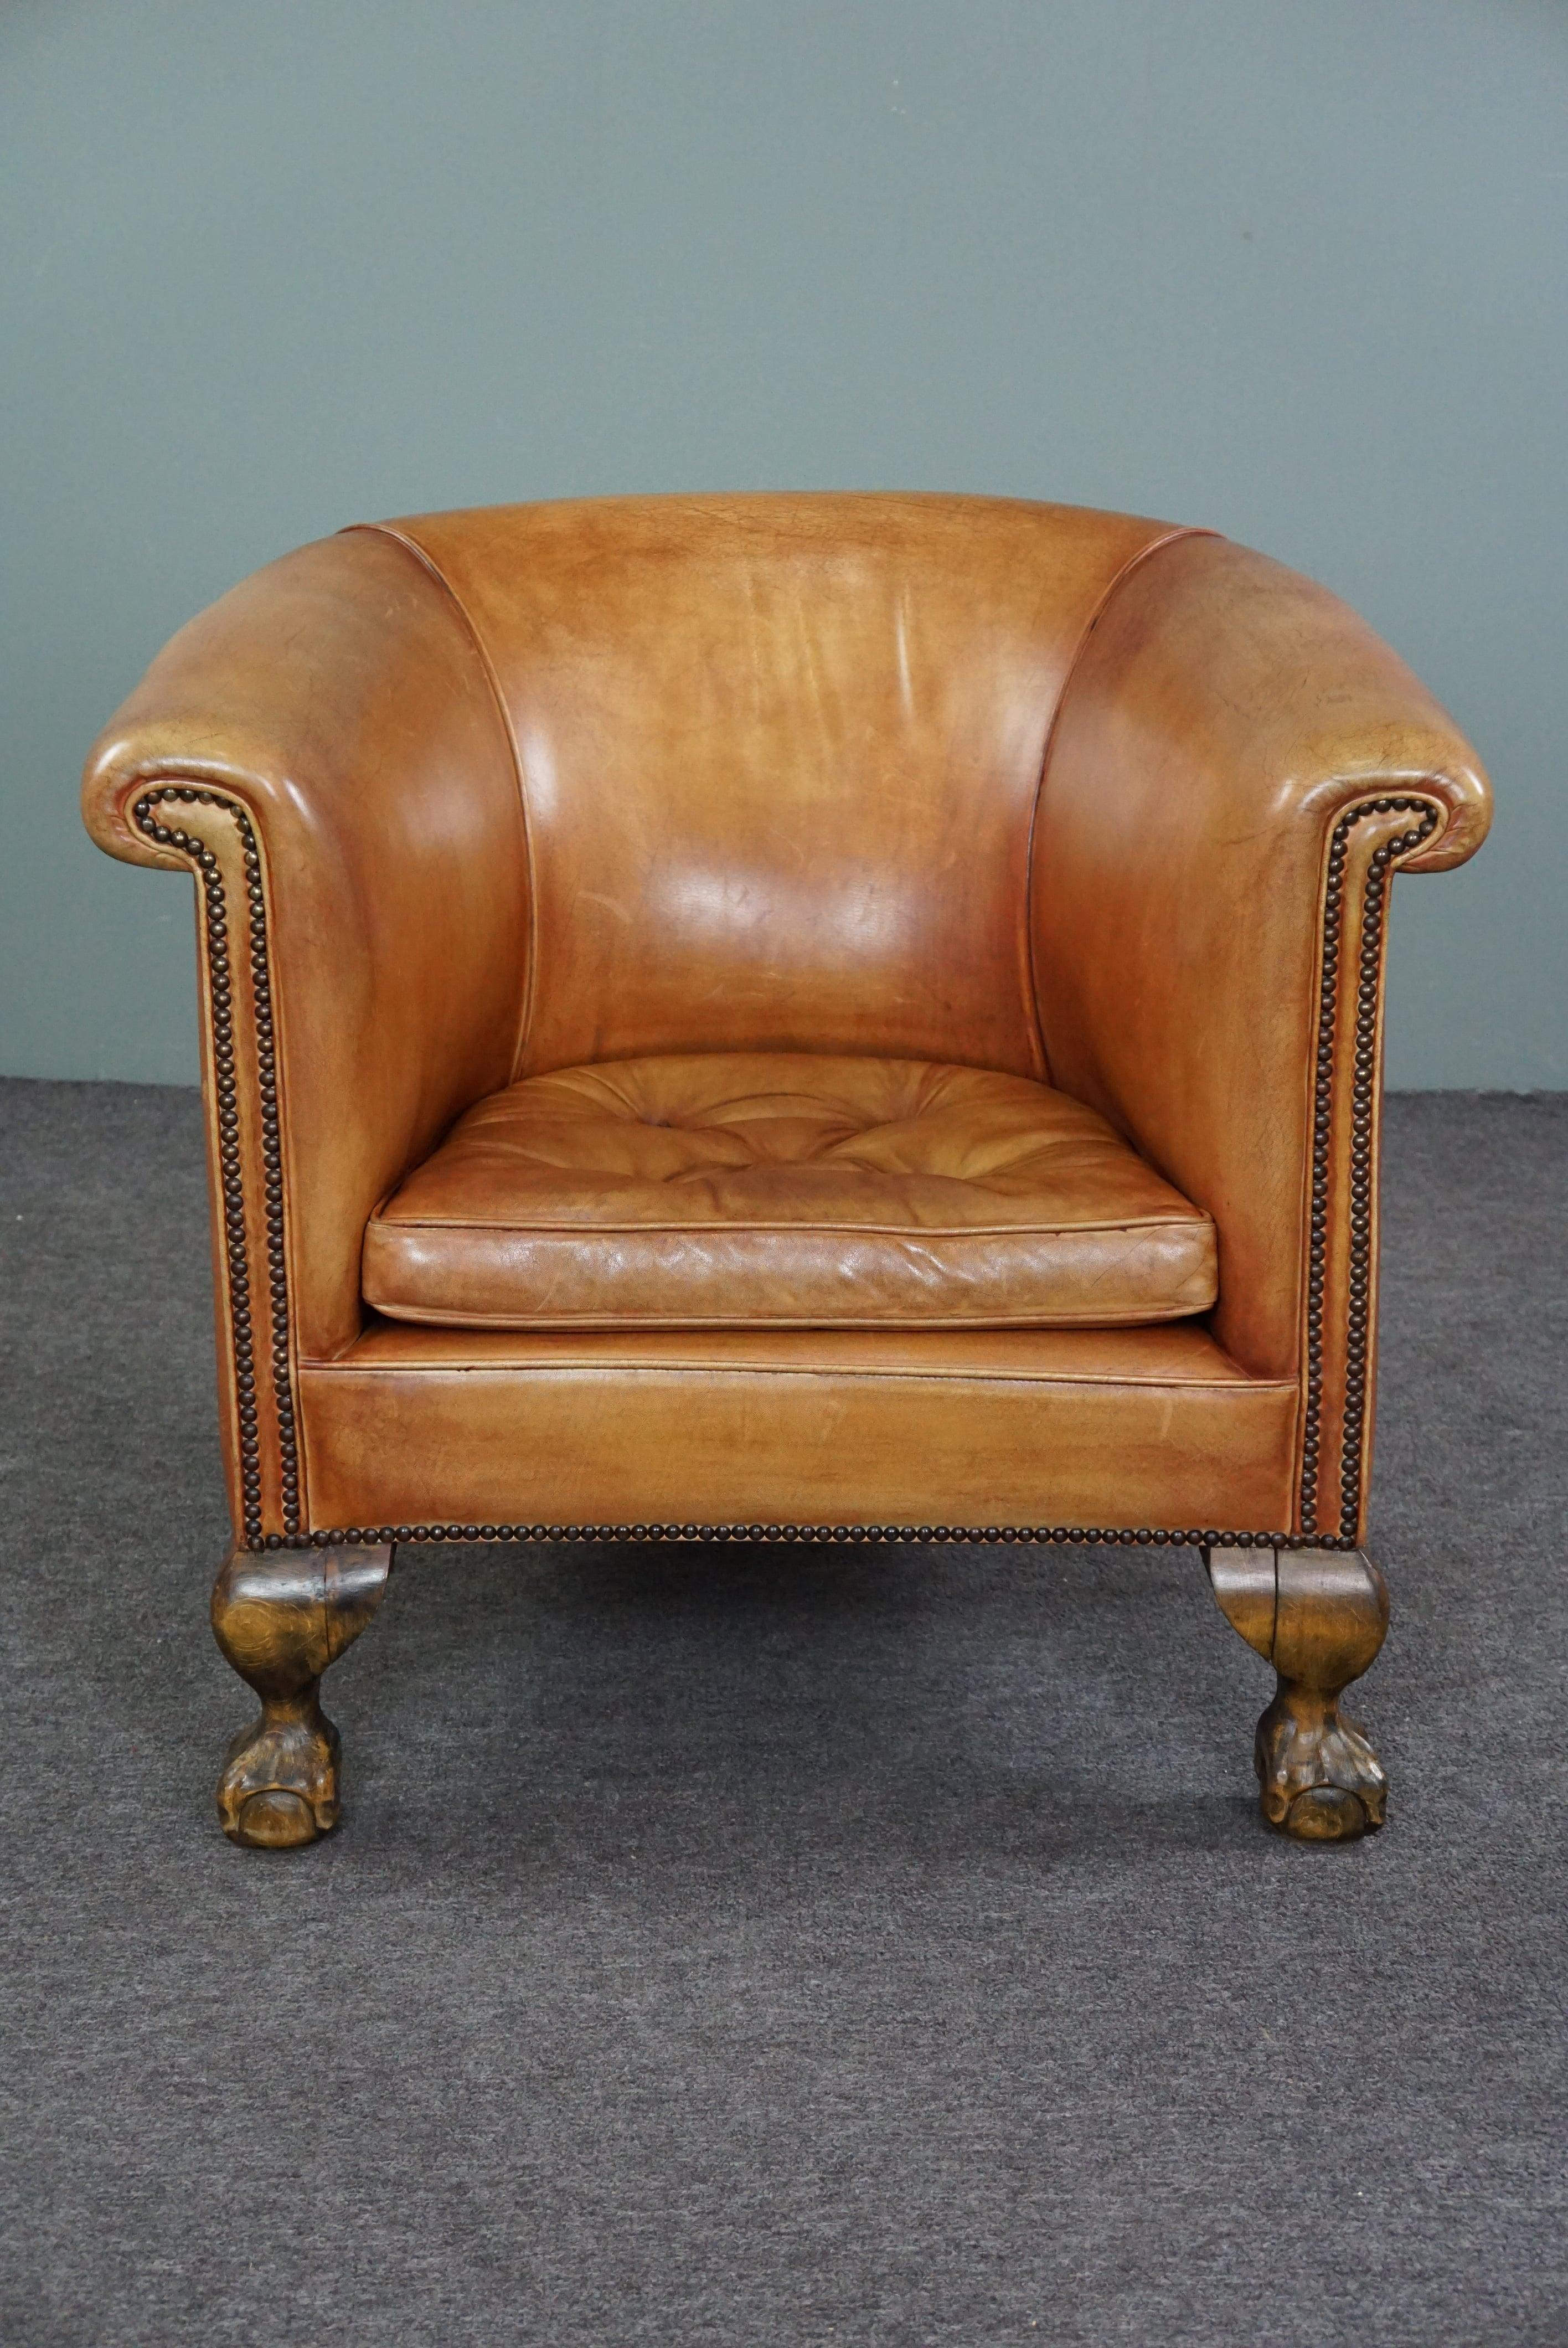 Offered is this very beautifully designed cowhide leather club chair with a highly sought-after appearance.

This beautiful pearl is in good condition and is very popular and appreciated among enthusiasts. The color of the cowhide in combination